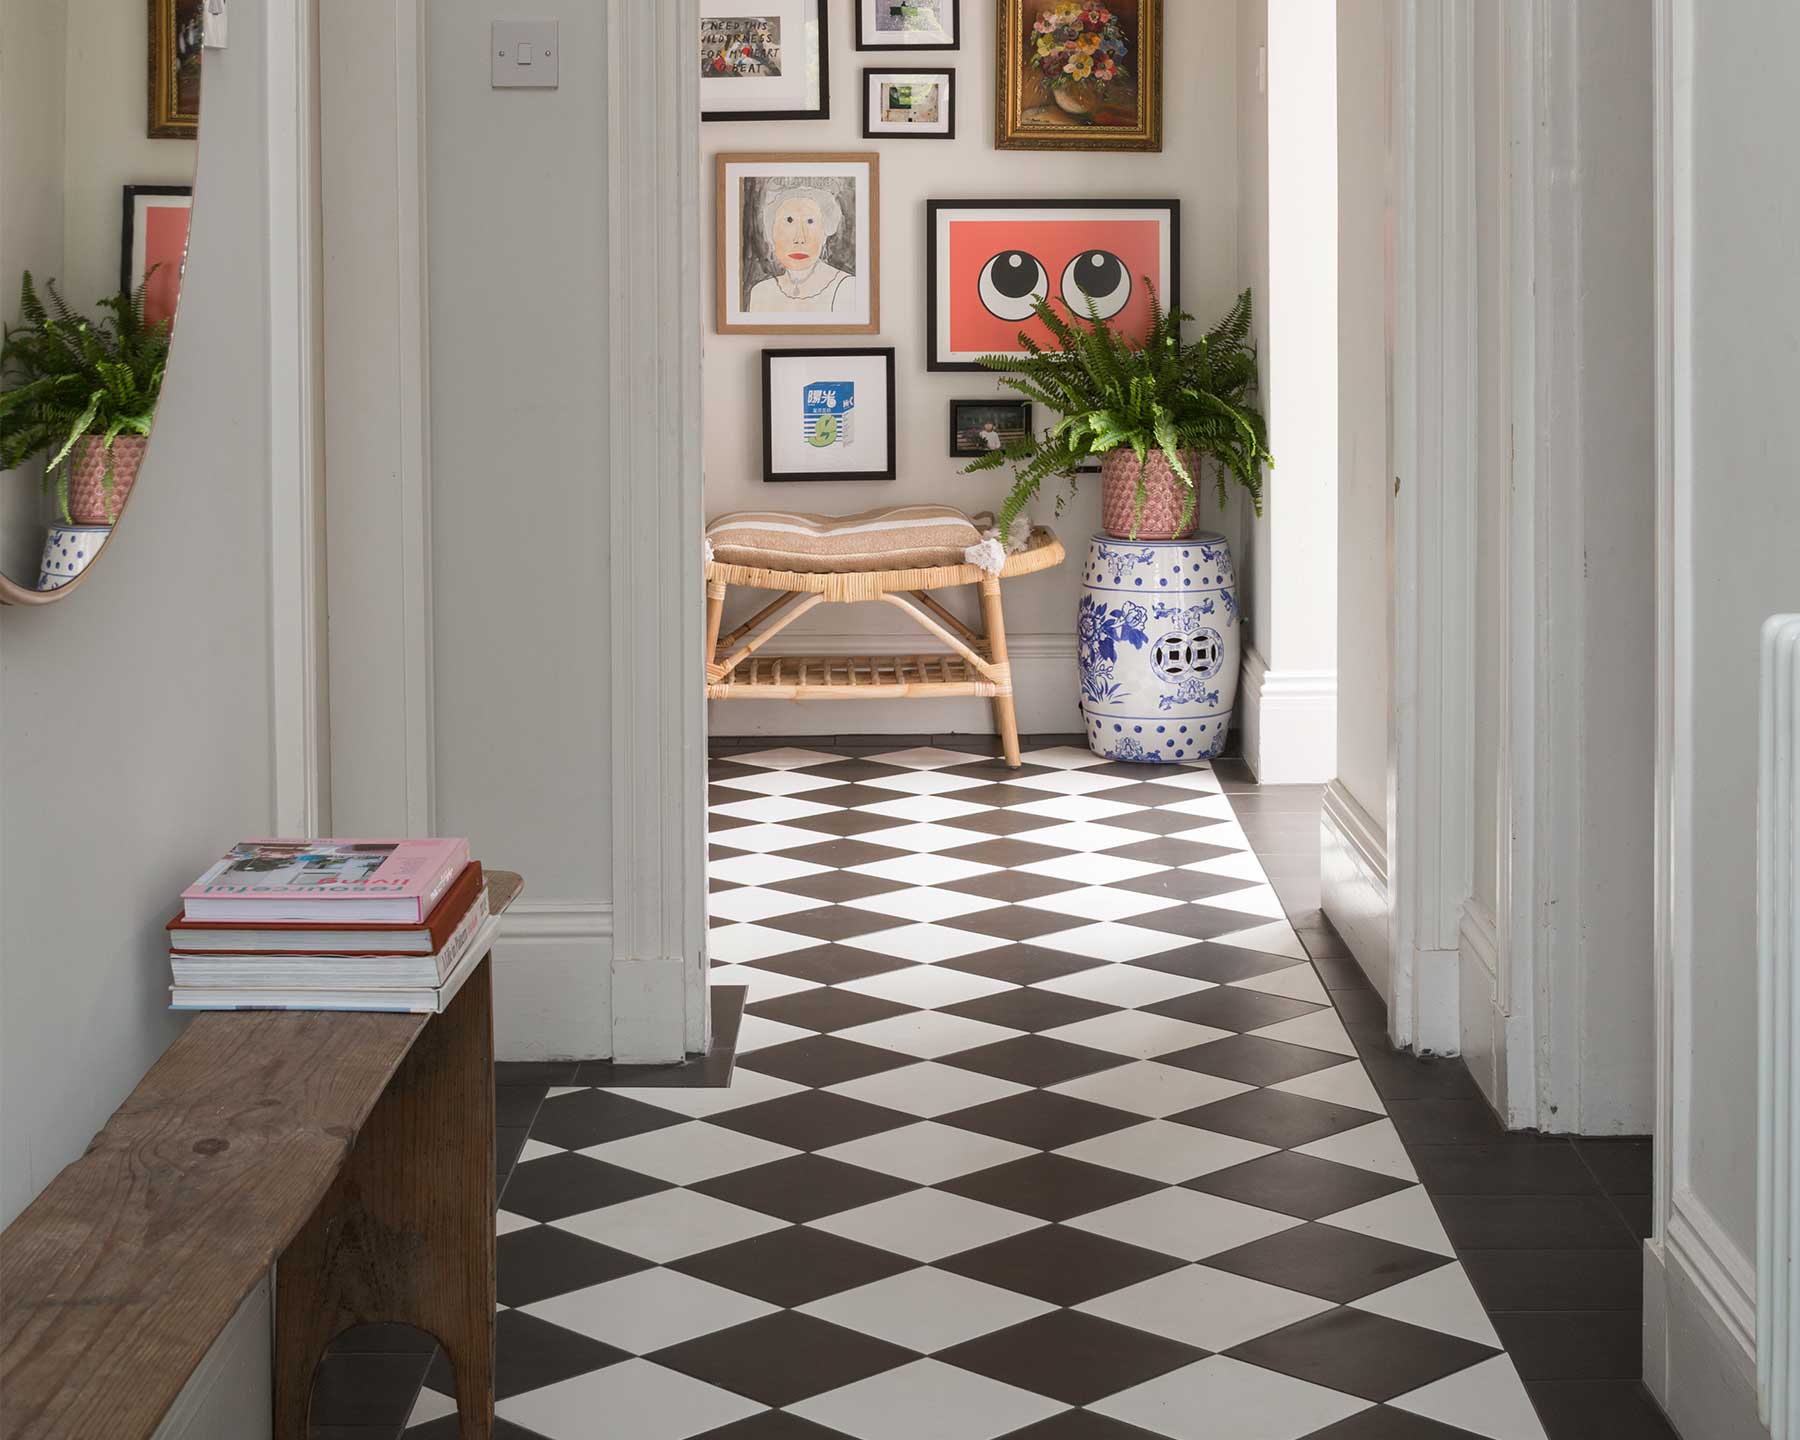 Chequerboard is a Victorian tiling idea that is unlikely to go out of fashion